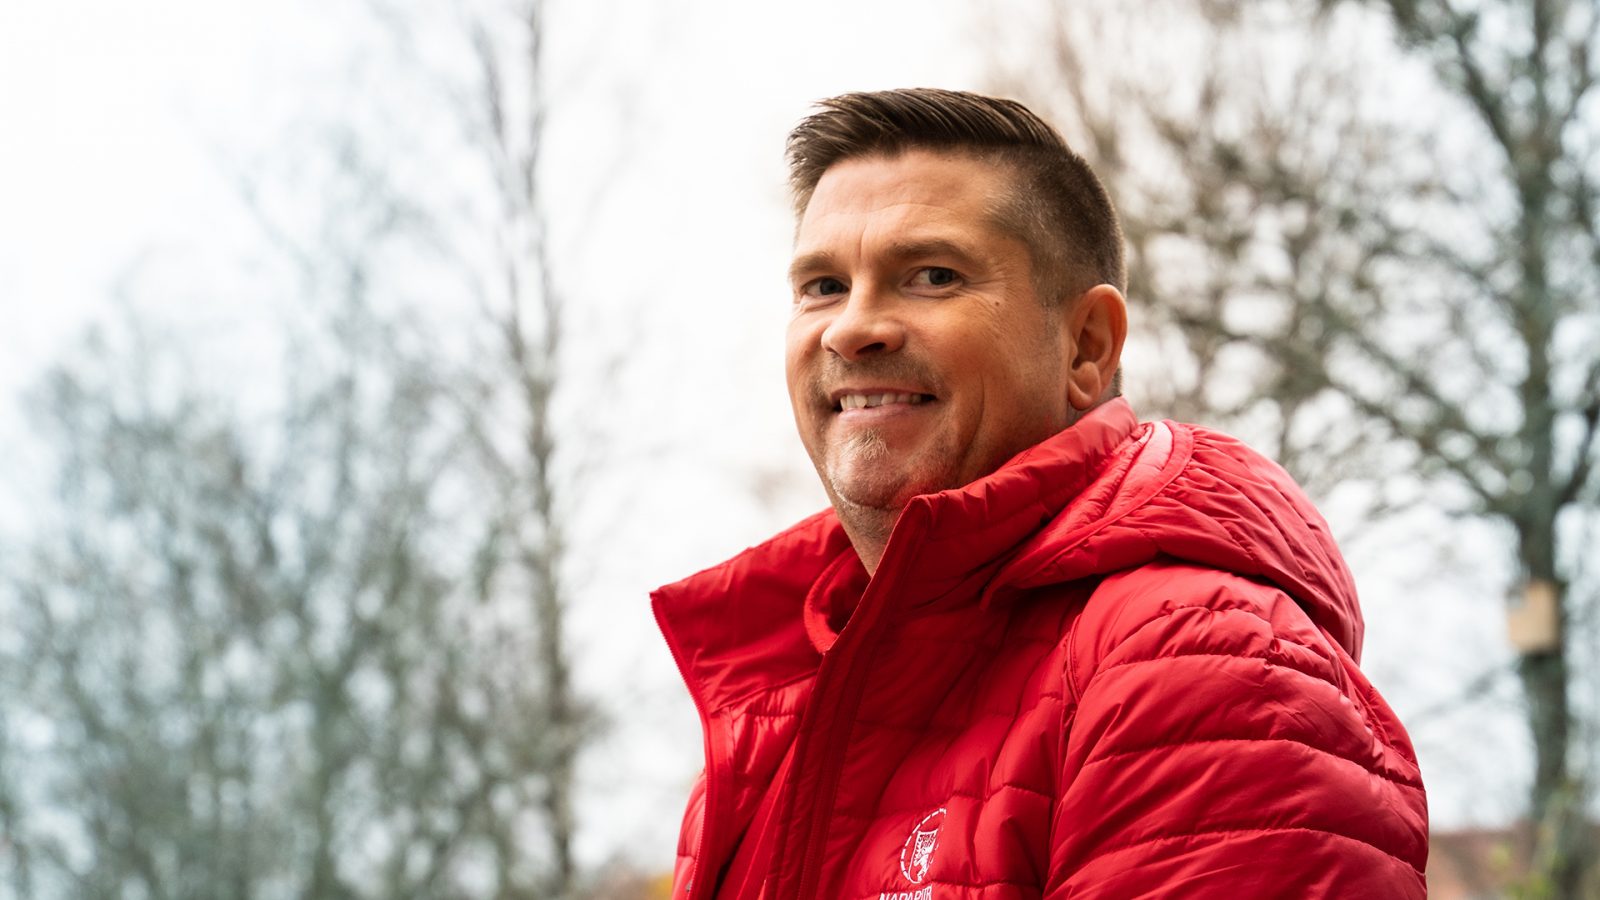 Man in a red shirt and red jacket smiling towards the camera with trees in the background.